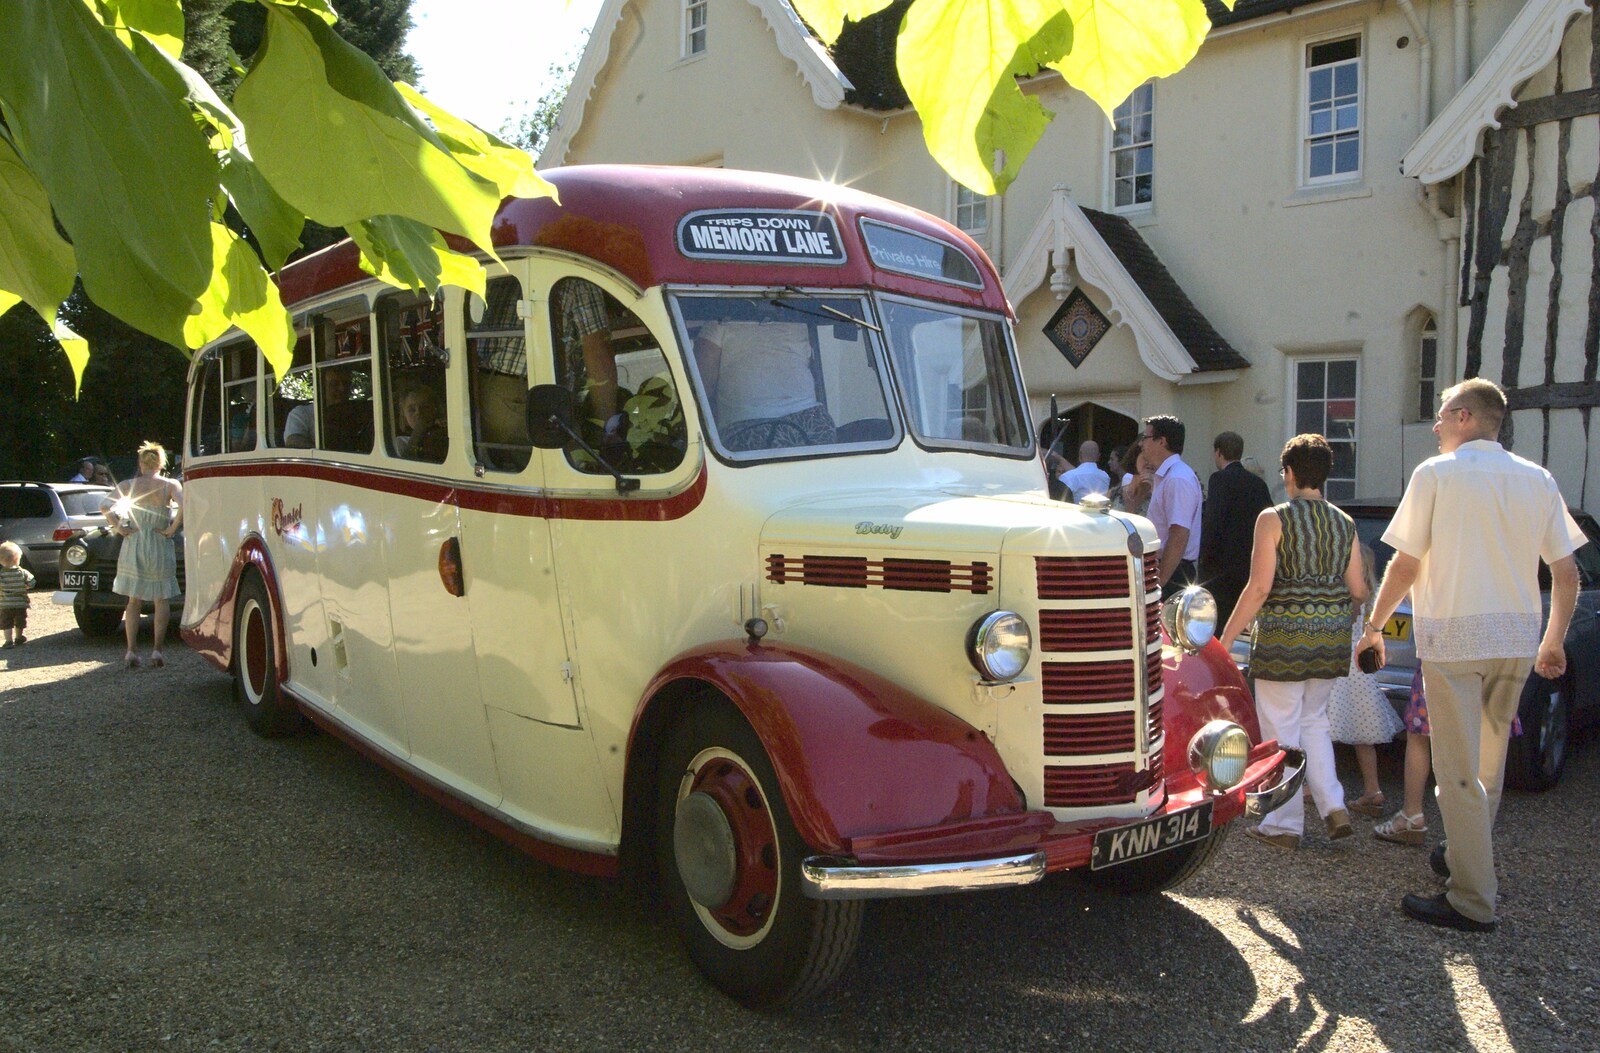 The lovely 1950s 'Memory Lane' bus from Clive and Suzanne's Wedding, Oakley and Brome, Suffolk - 10th July 2010